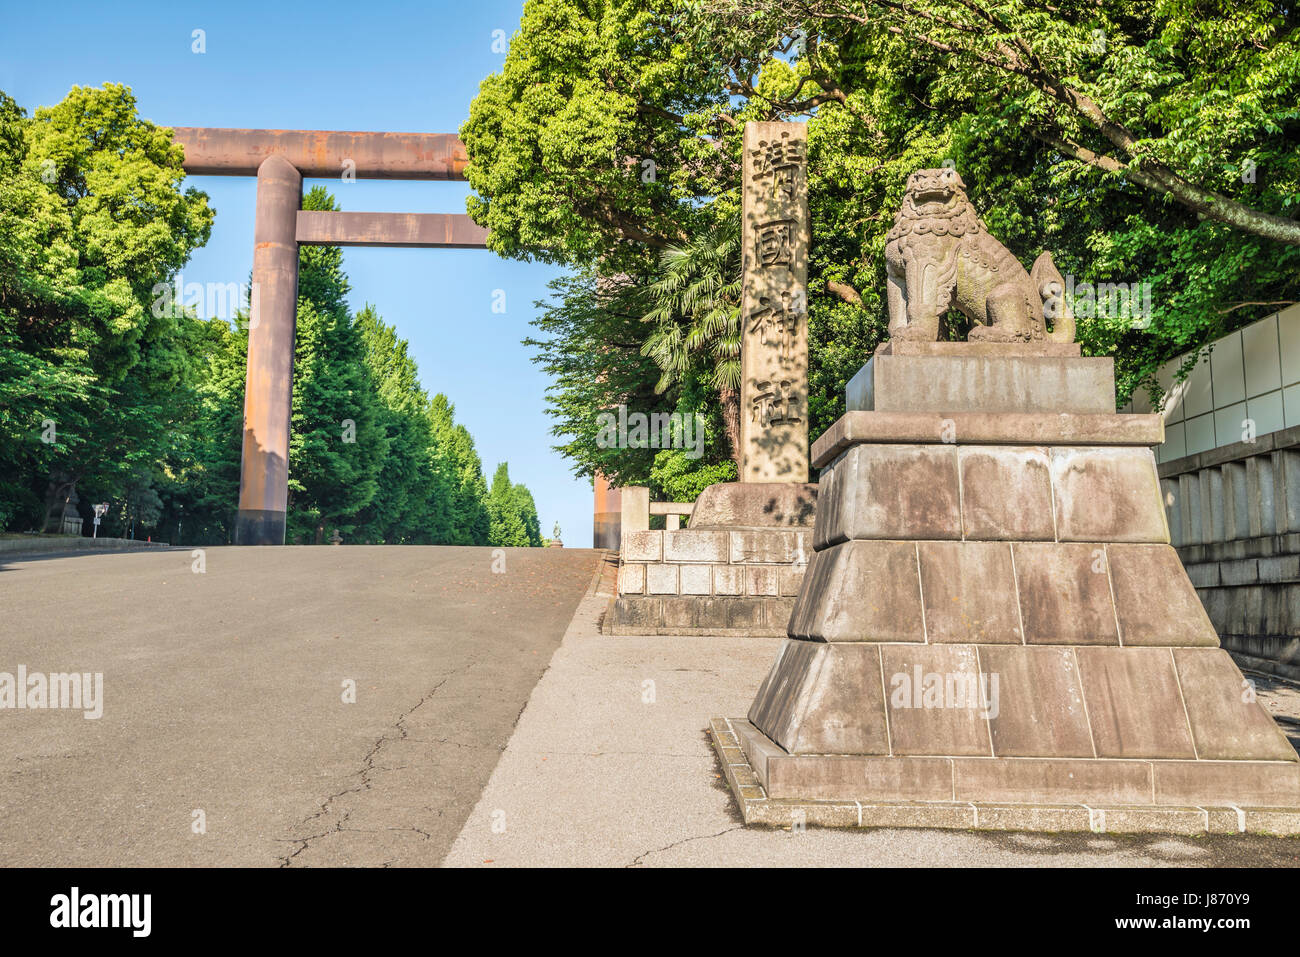 Daiichi Torii Shinto Gate And Stone Lion At The Entrance The Imperial